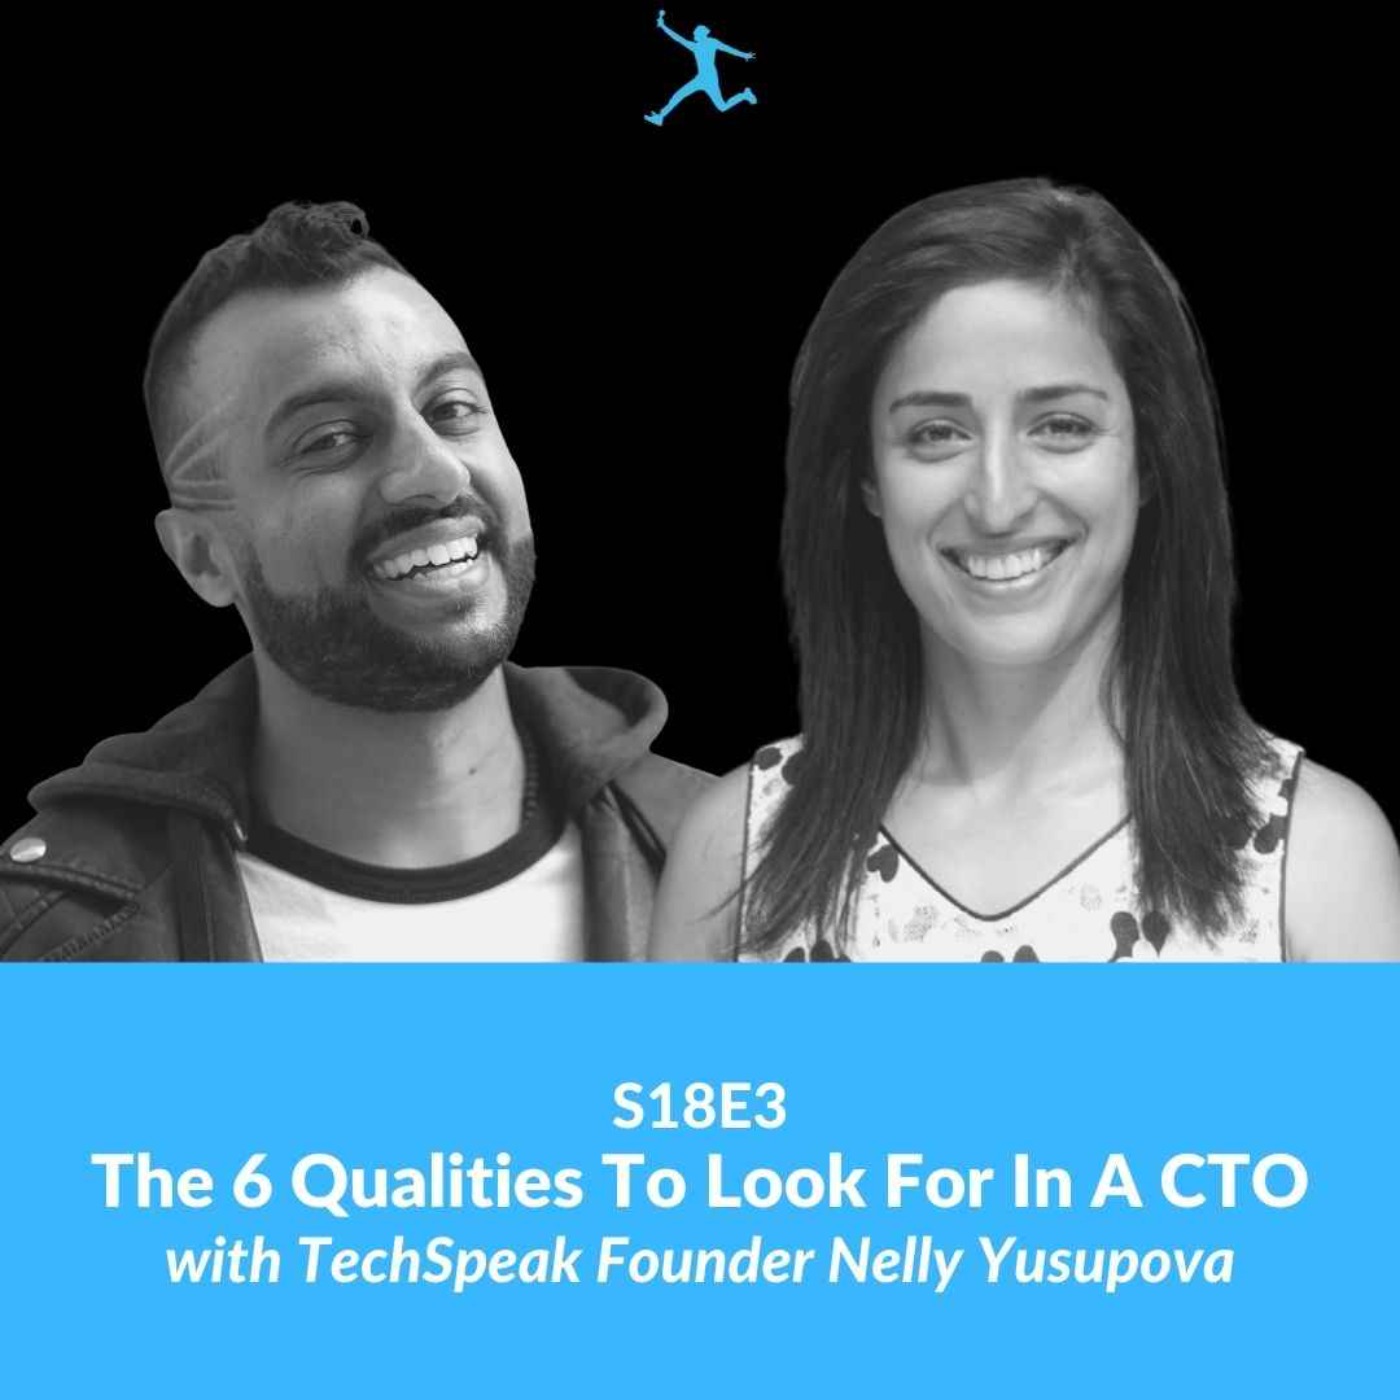 S18E3: The 6 Qualities To Look For In A CTO with TechSpeak Founder Nelly Yusupova